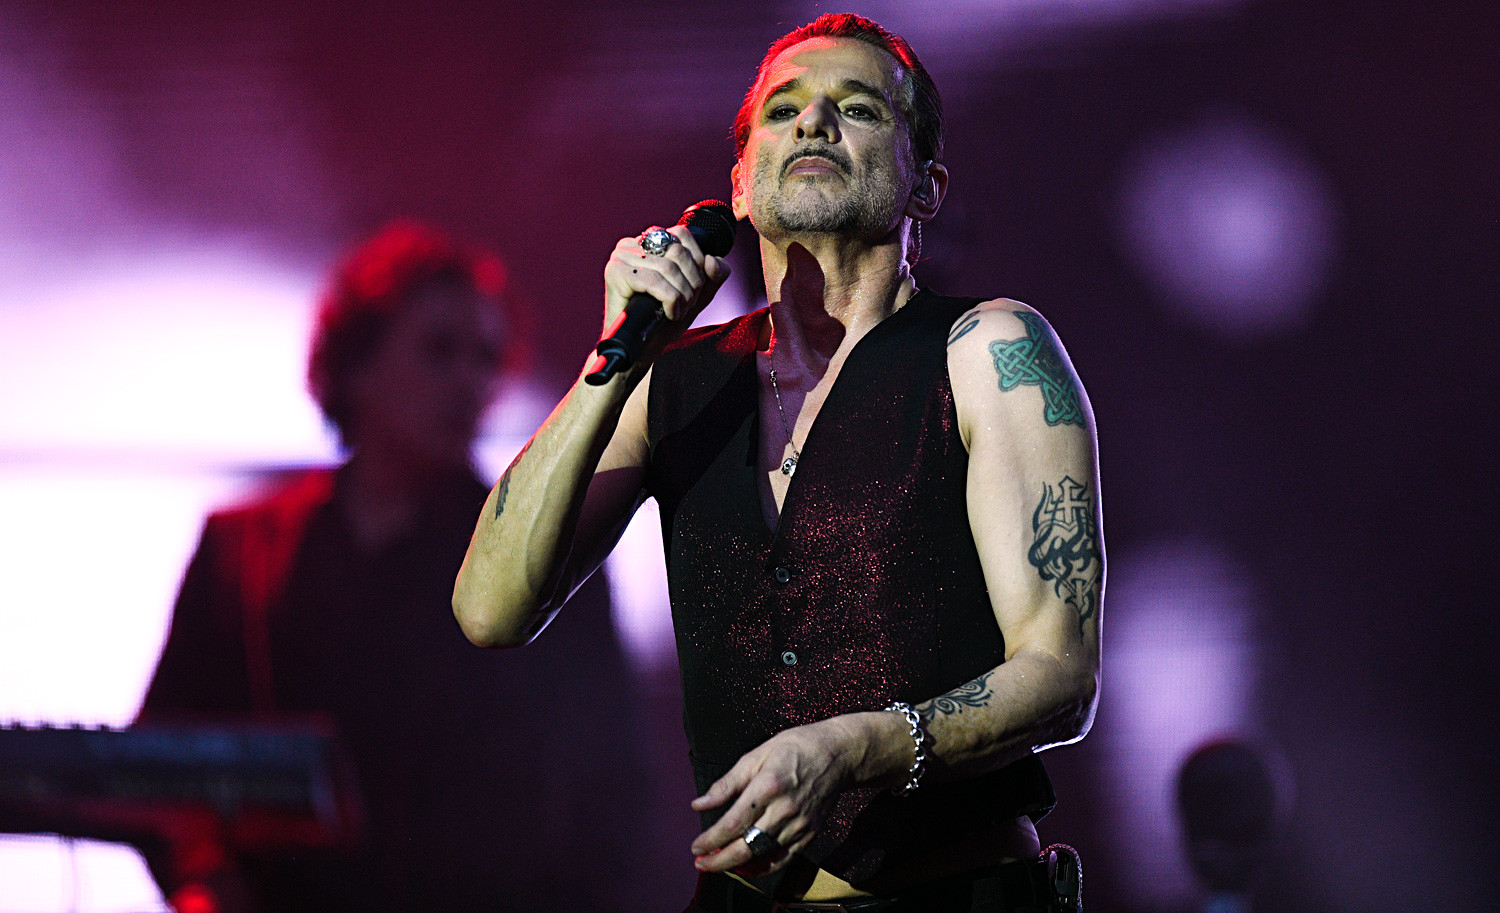 Depeche Mode vocalist Dave Gahan performs live at the Otkrytiye Arena stadium in Moscow as part of the band's Global Spirit Tour.